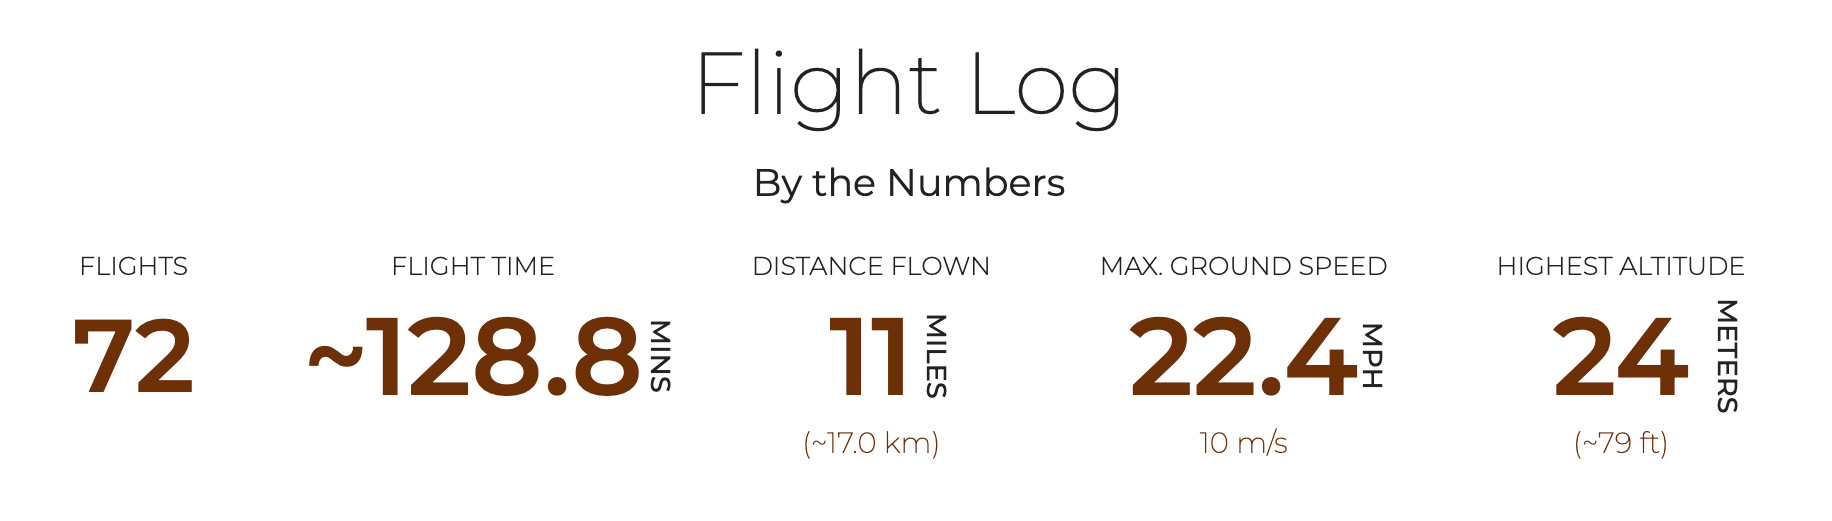 Flight Log by the Numbers: 72 flights, ~128.8 mins flight time, distance flown 11 miles/17 km, max ground speed 22.4 mph/10 m/s, highest altitude 24 meters/79 ft